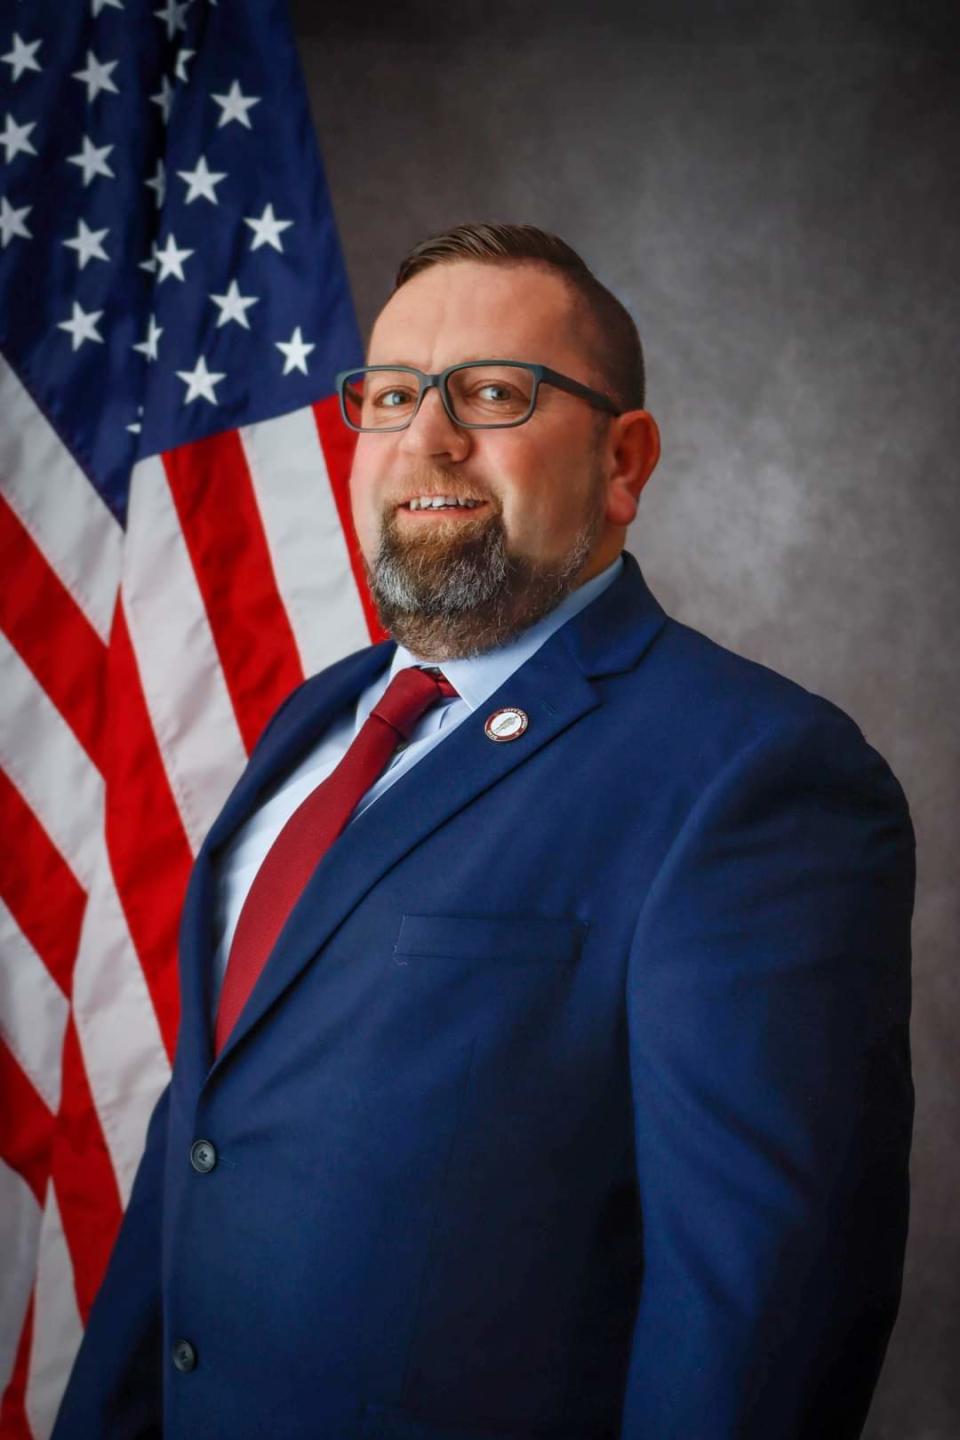 Jeremy McIntire is hoping to unseat incumbent Gloria Rodgers and represent the Republican party in this fall's Summit County Council general election.